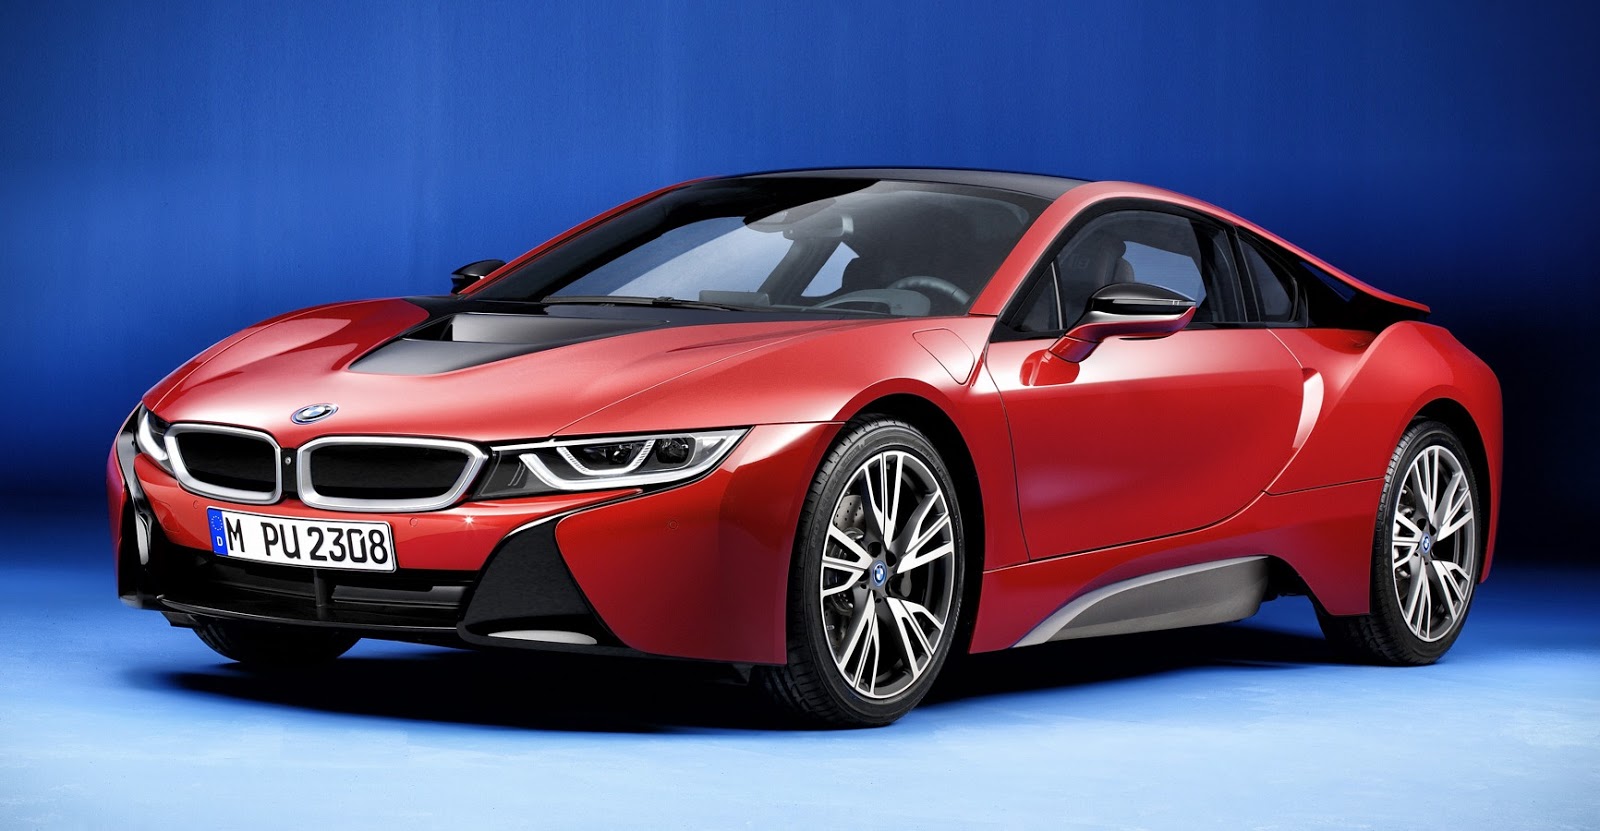 bmw-plans-for-pure-electric-i8-with-750-hp-480-kms-range